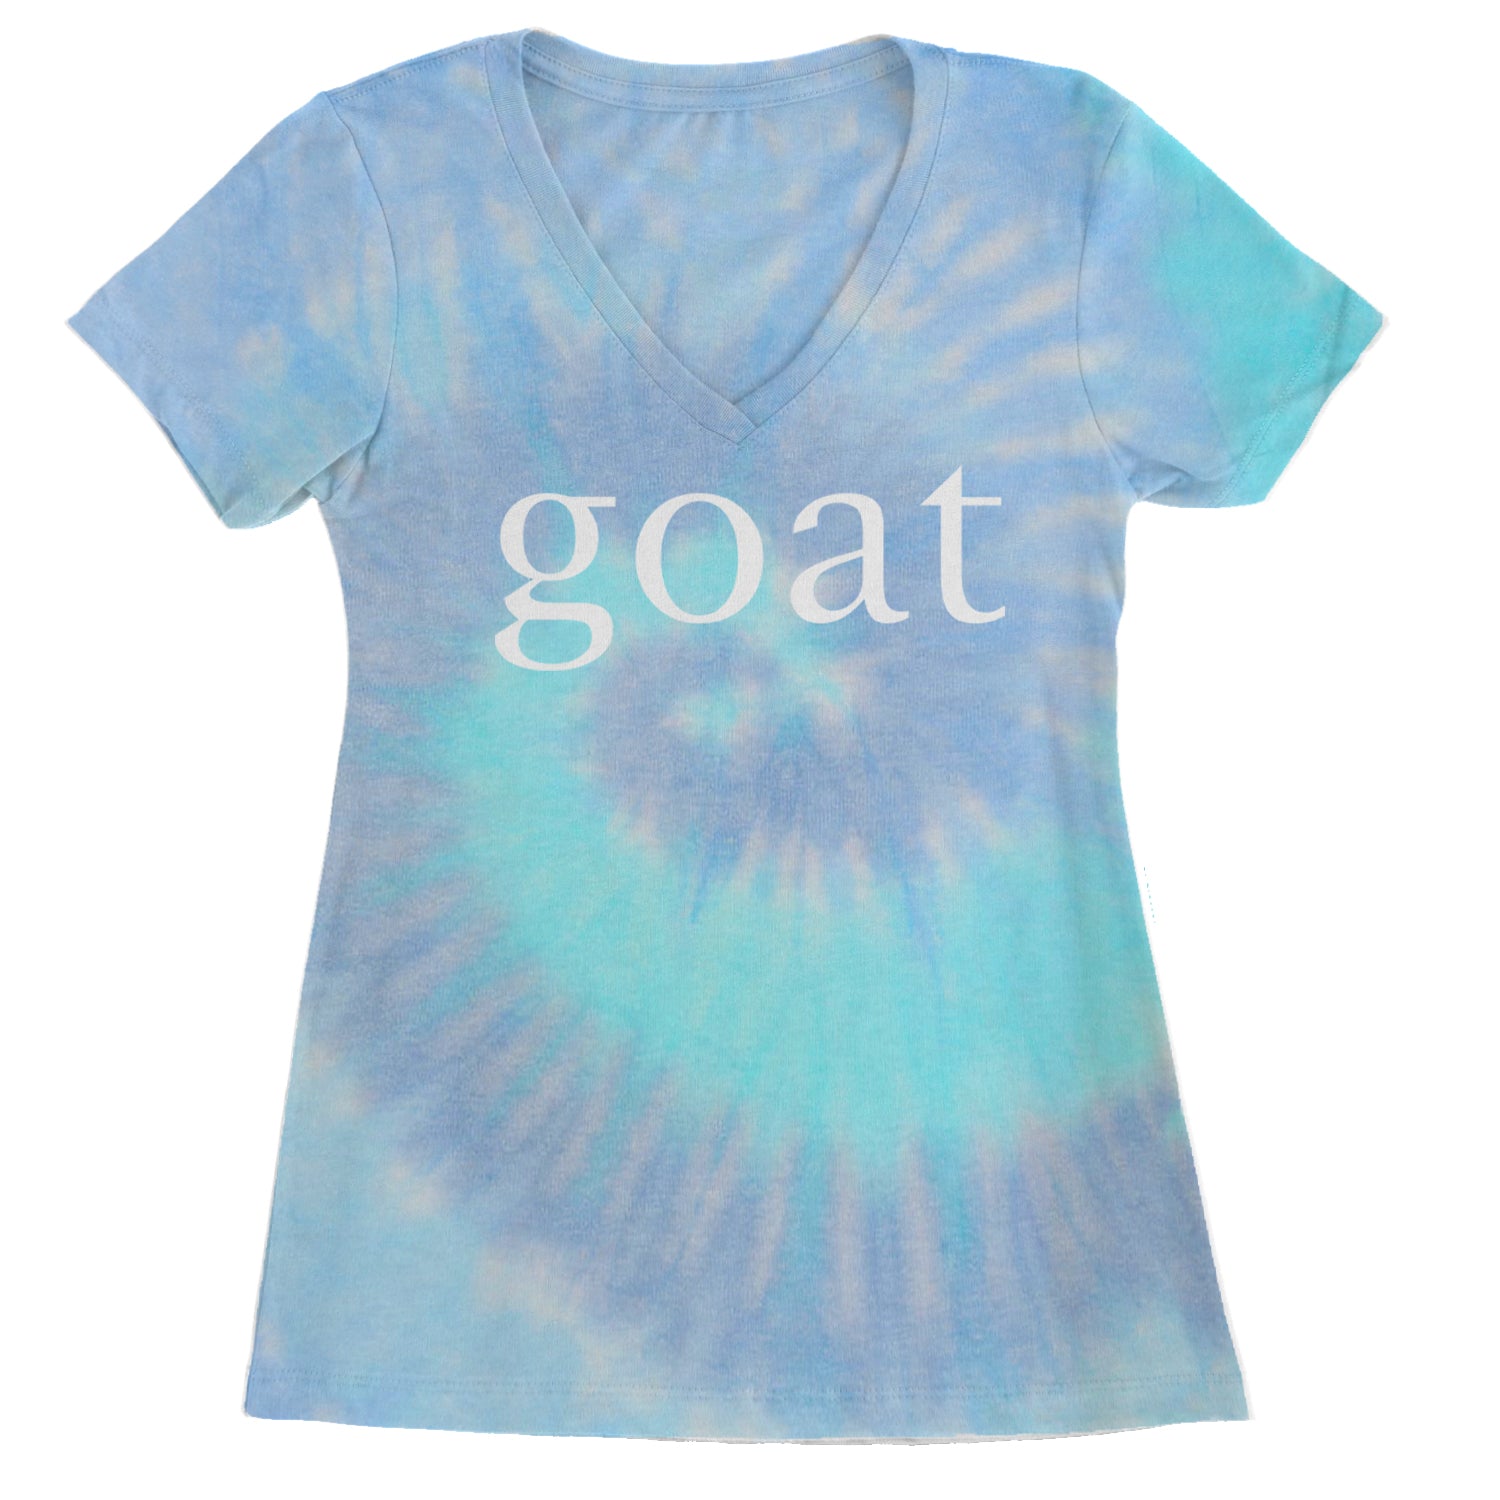 GOAT - Greatest Of All Time  Ladies V-Neck T-shirt Blue Clouds